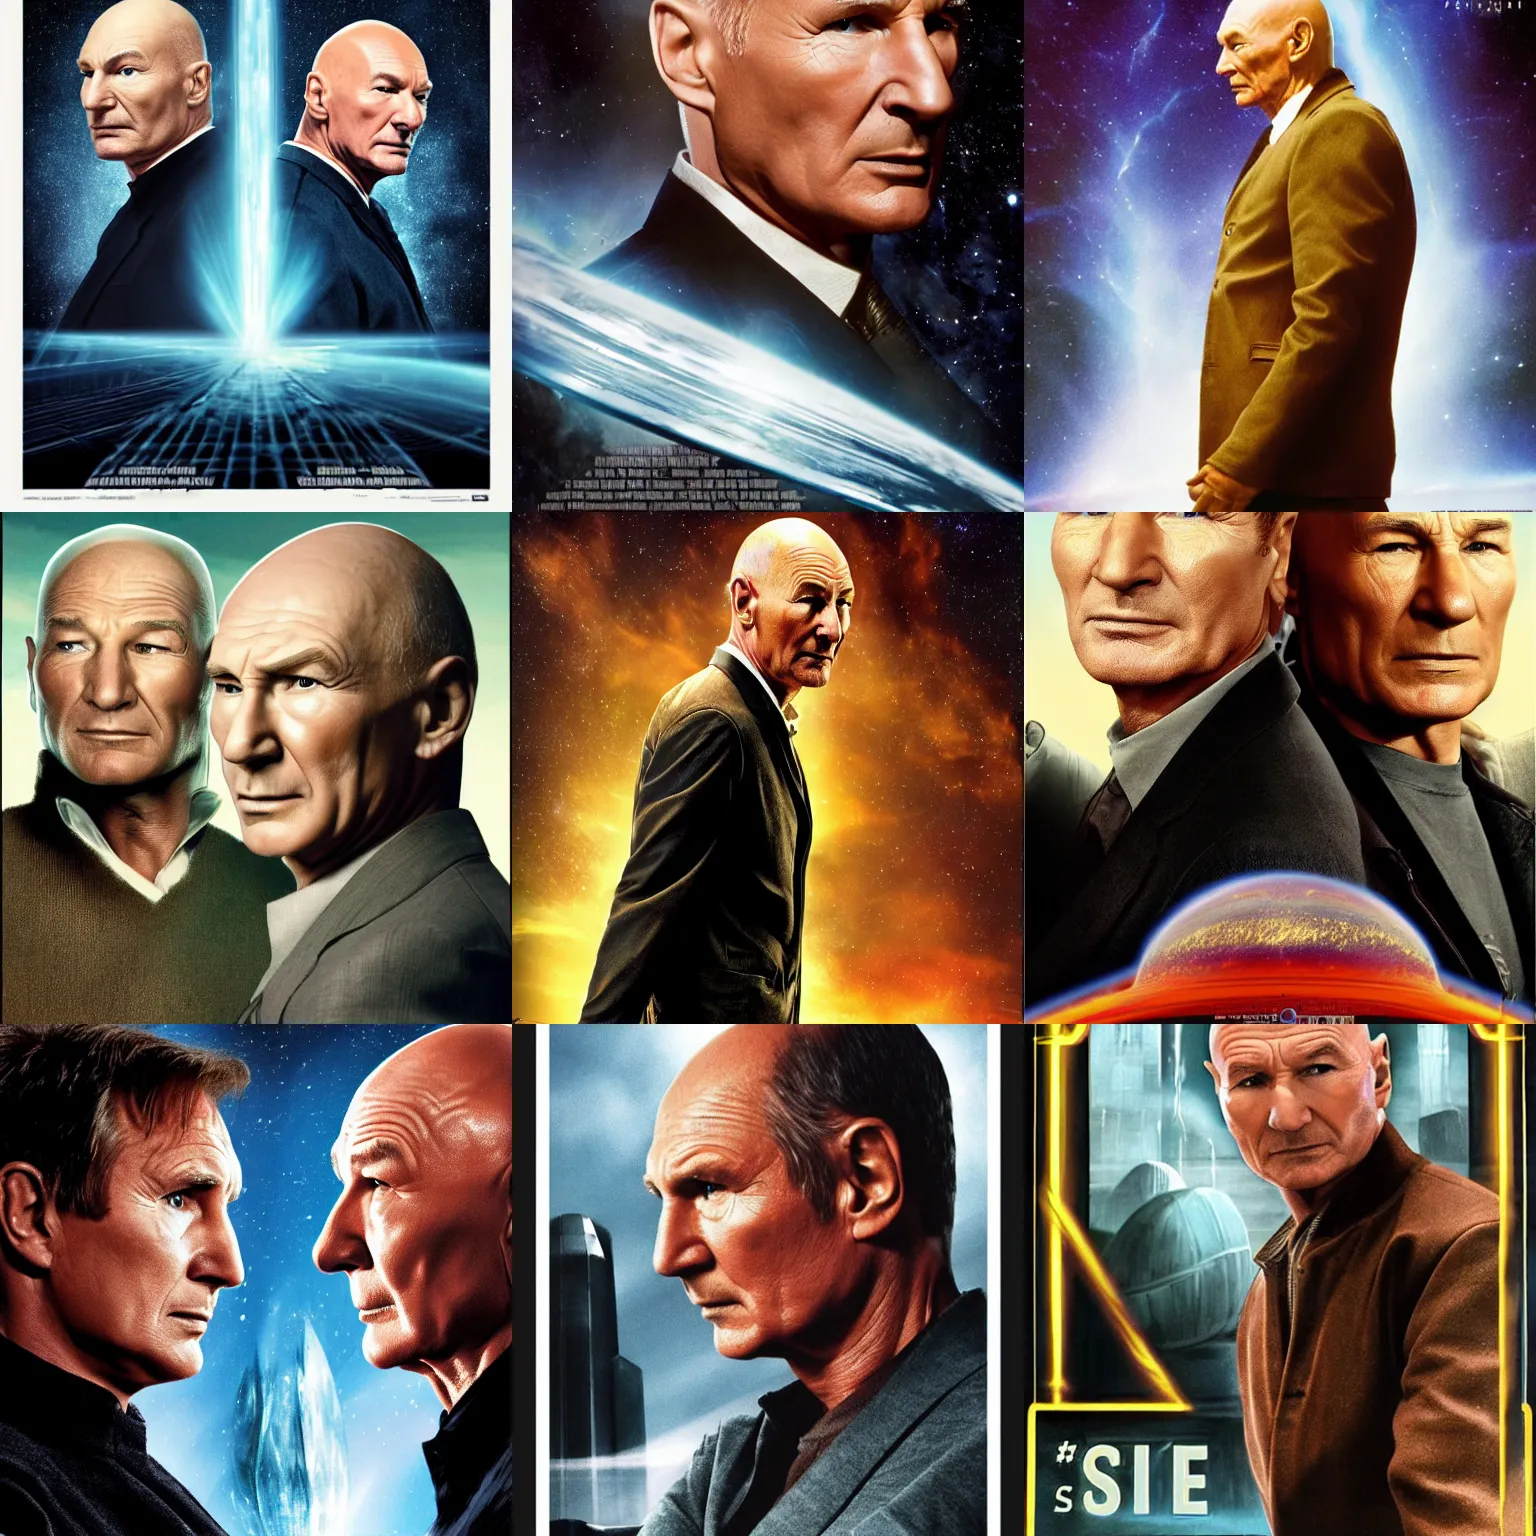 Prompt: side view of liam neeson facing patrick stewart, sci - fi movie poster